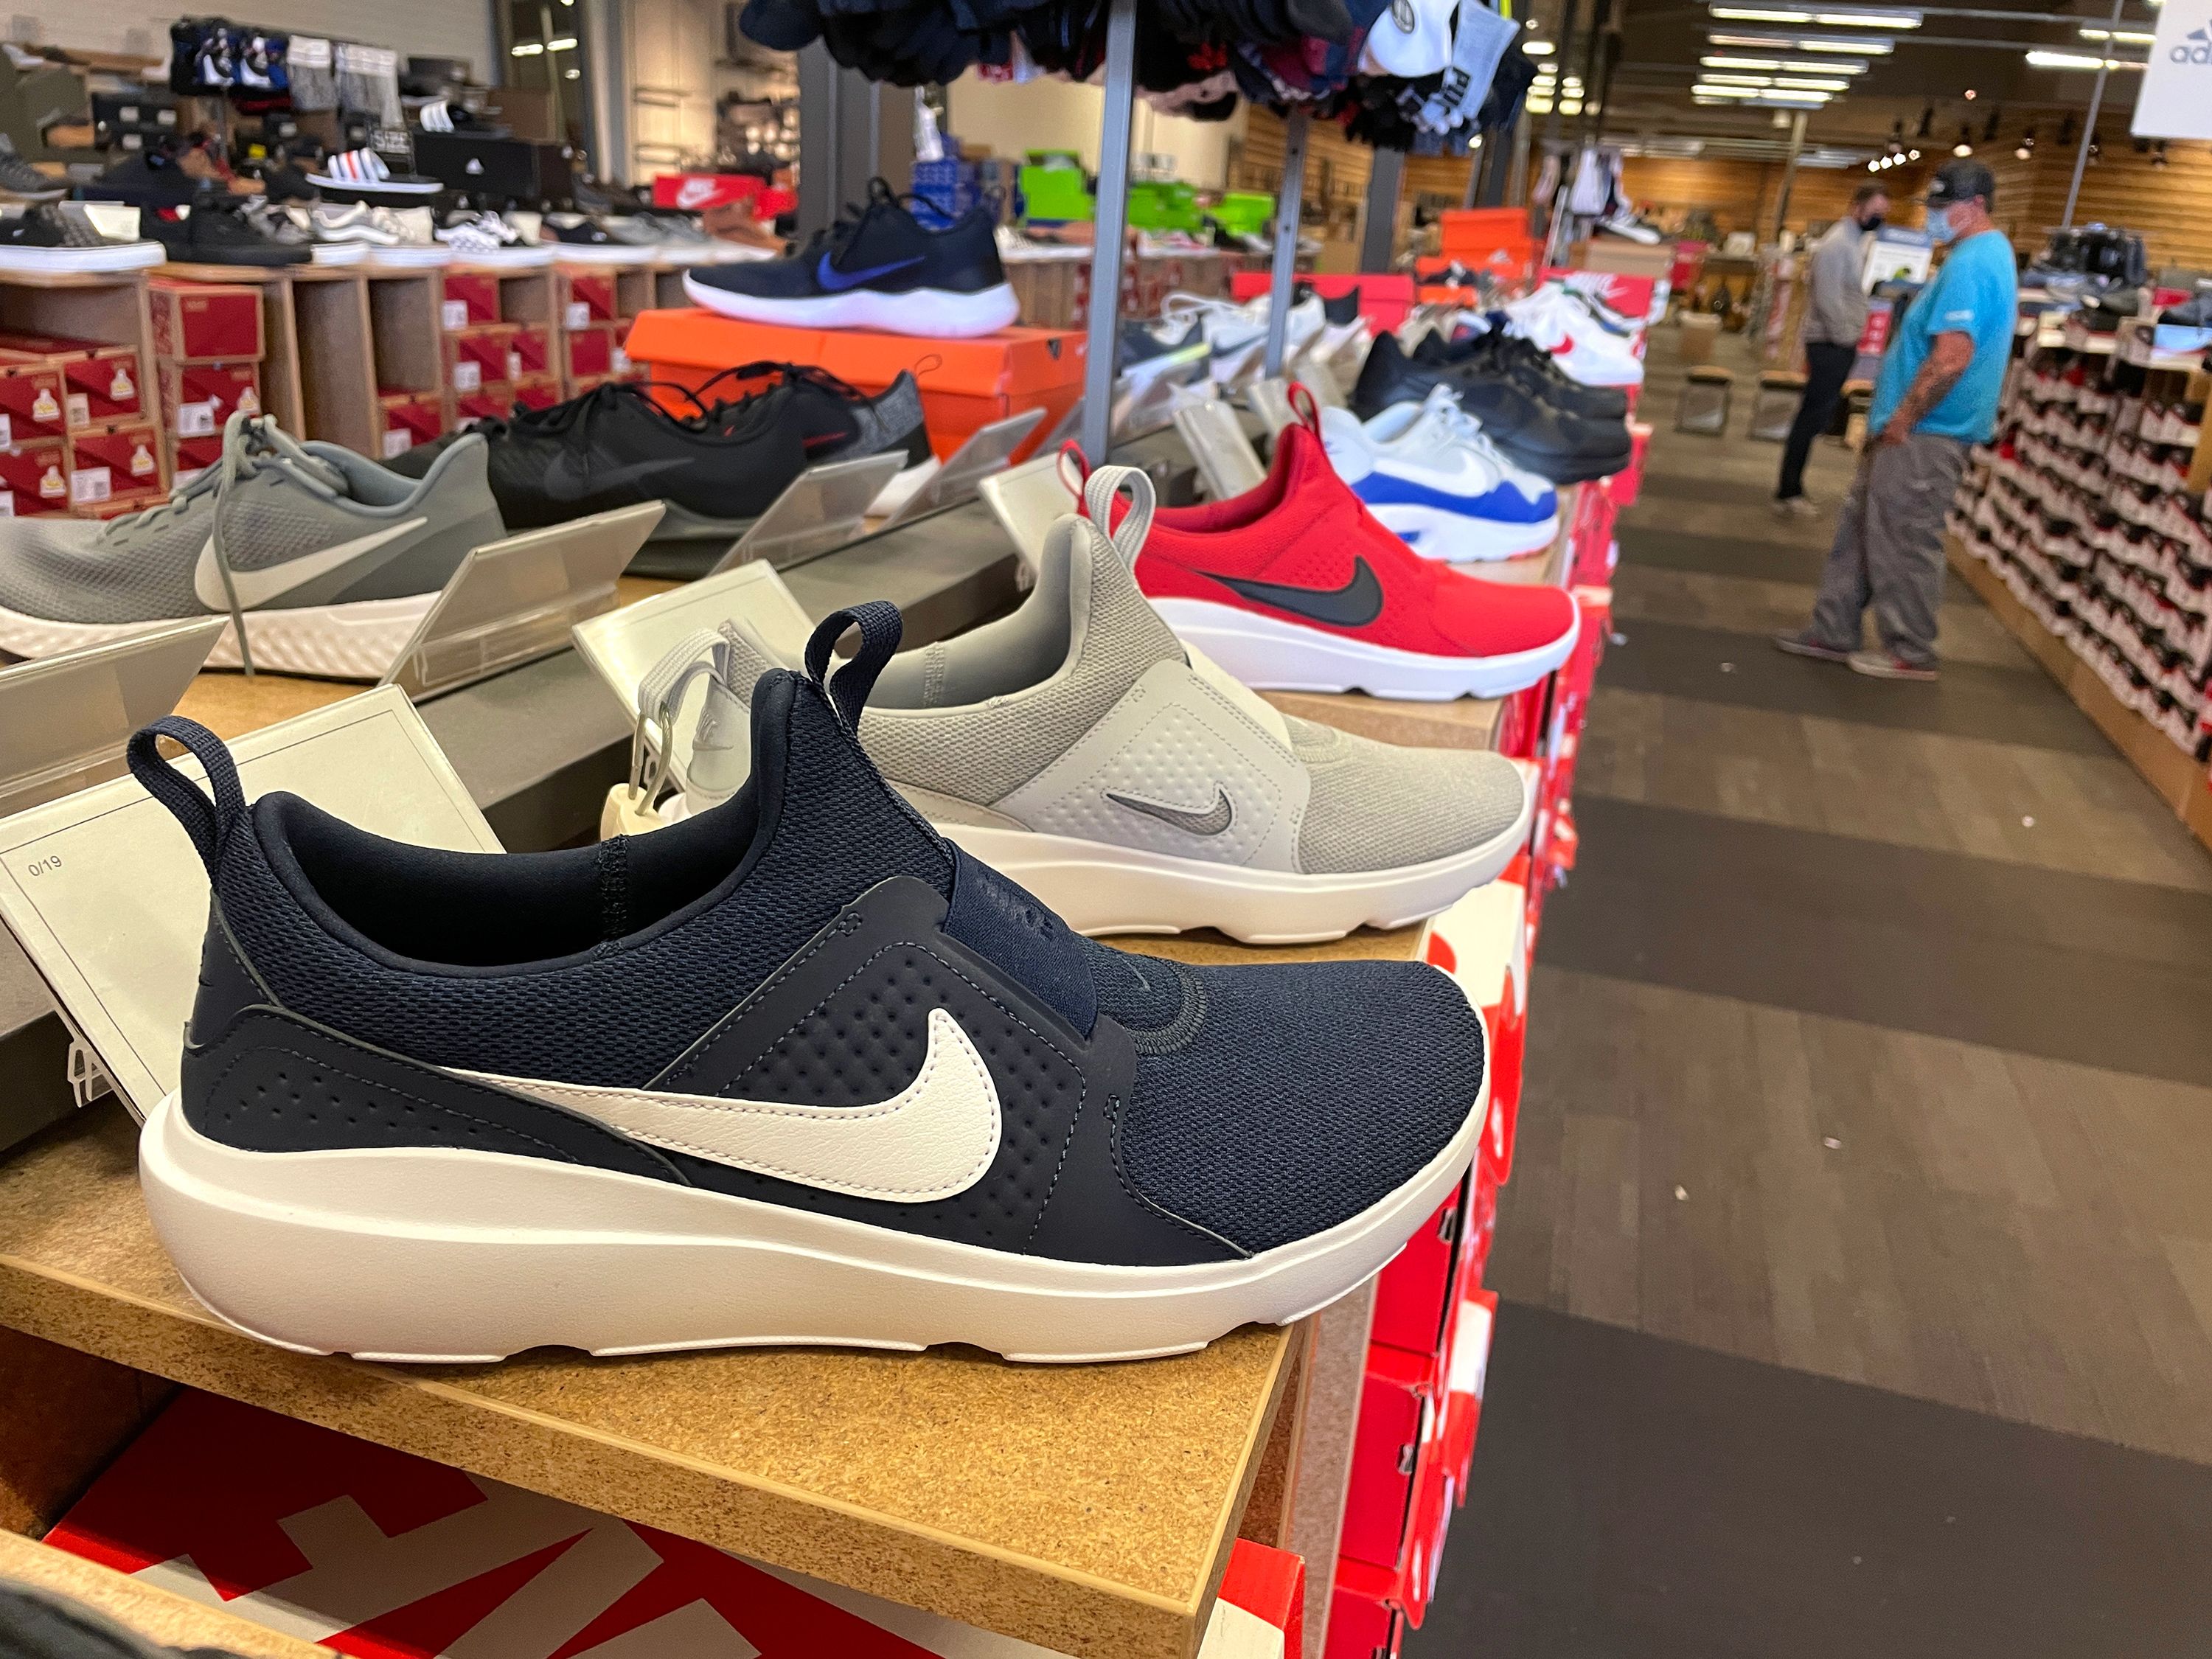 Nike, Armour and others face supply problems in Vietnam | CNN Business